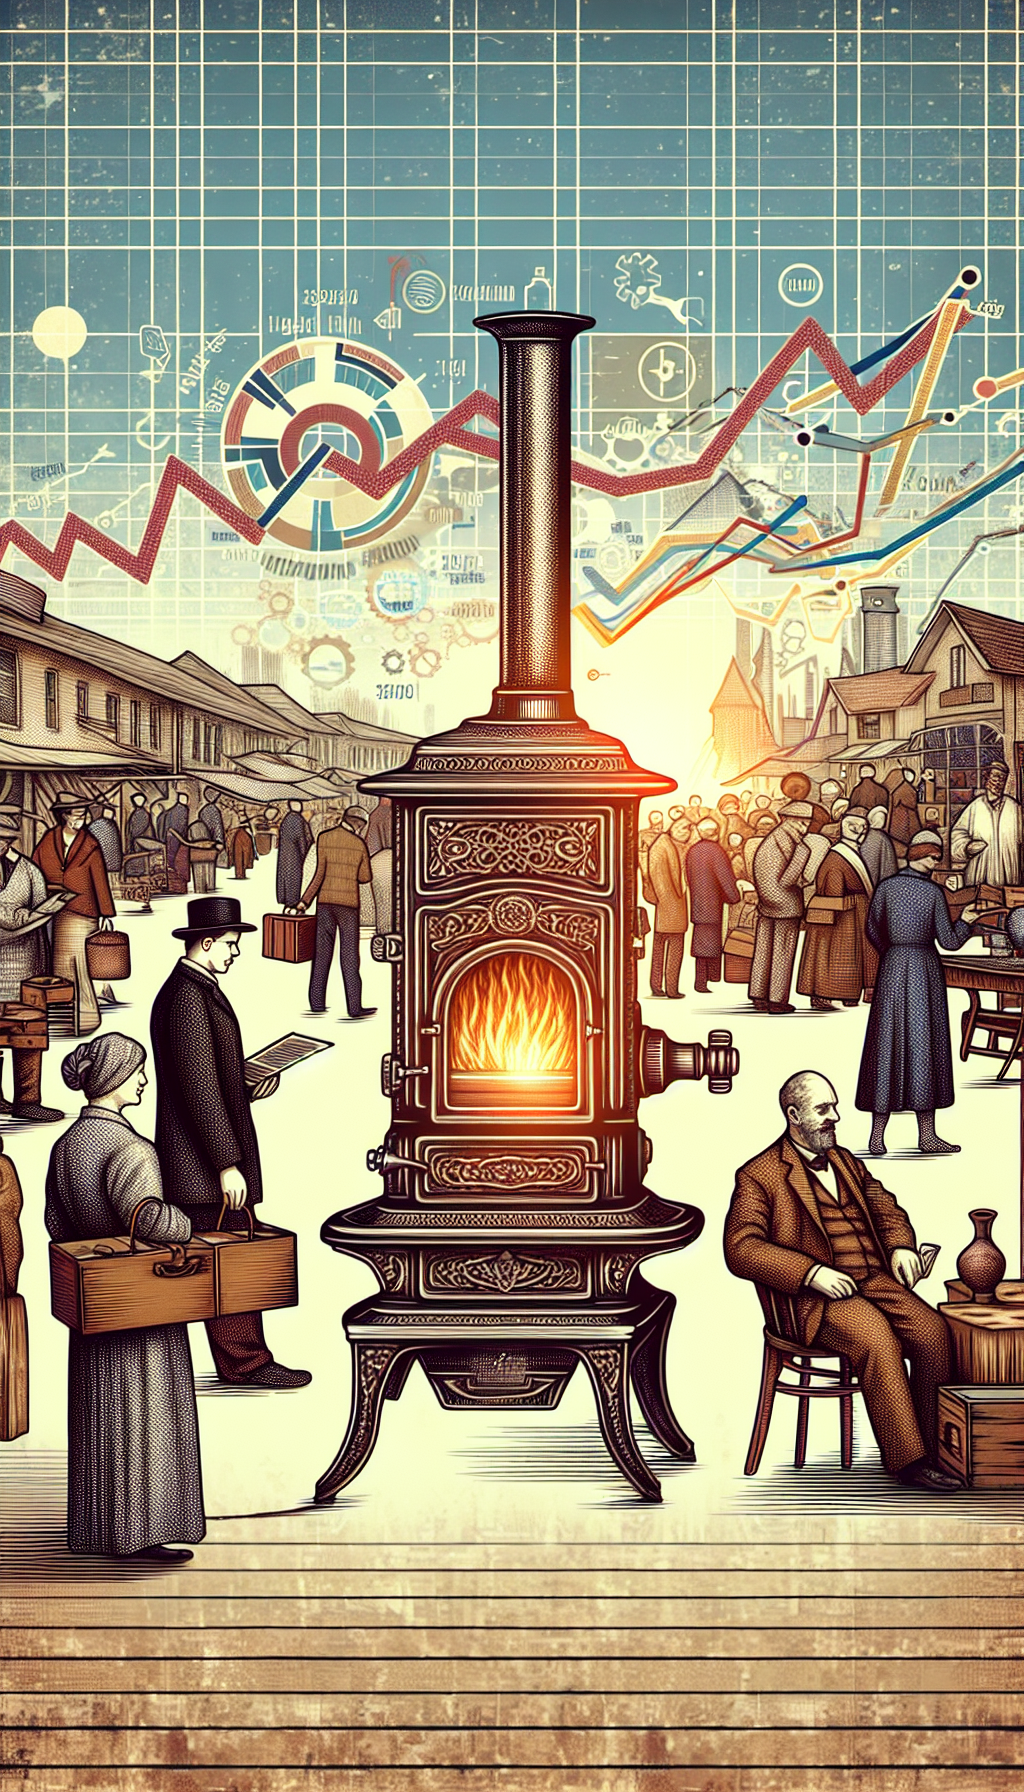 An illustration depicting an antique parlor stove at the center of a whimsical market square, pulsating with rays of influence that touch surrounding vintage shoppers and collectors. The stove's intricate patterns glow slightly, symbolizing its value, while market indicators and trend lines weave through the crowd as they seek out this centerpiece of warmth and historical charm.